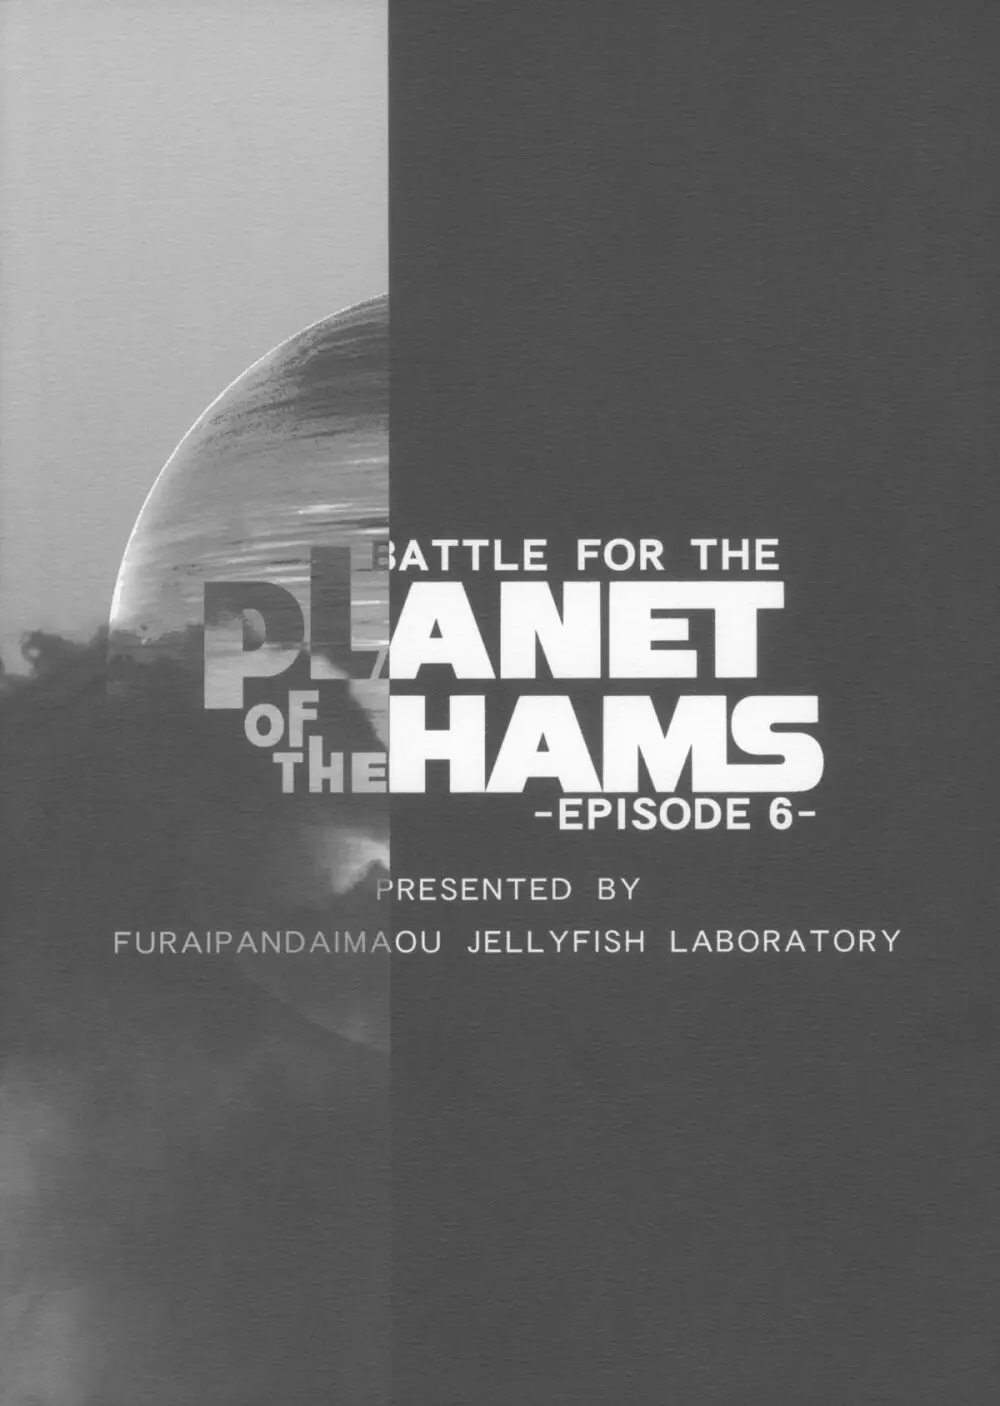 BATTLE FOR THE PLANET OF THE HAMS -EPISODE 6- - page2